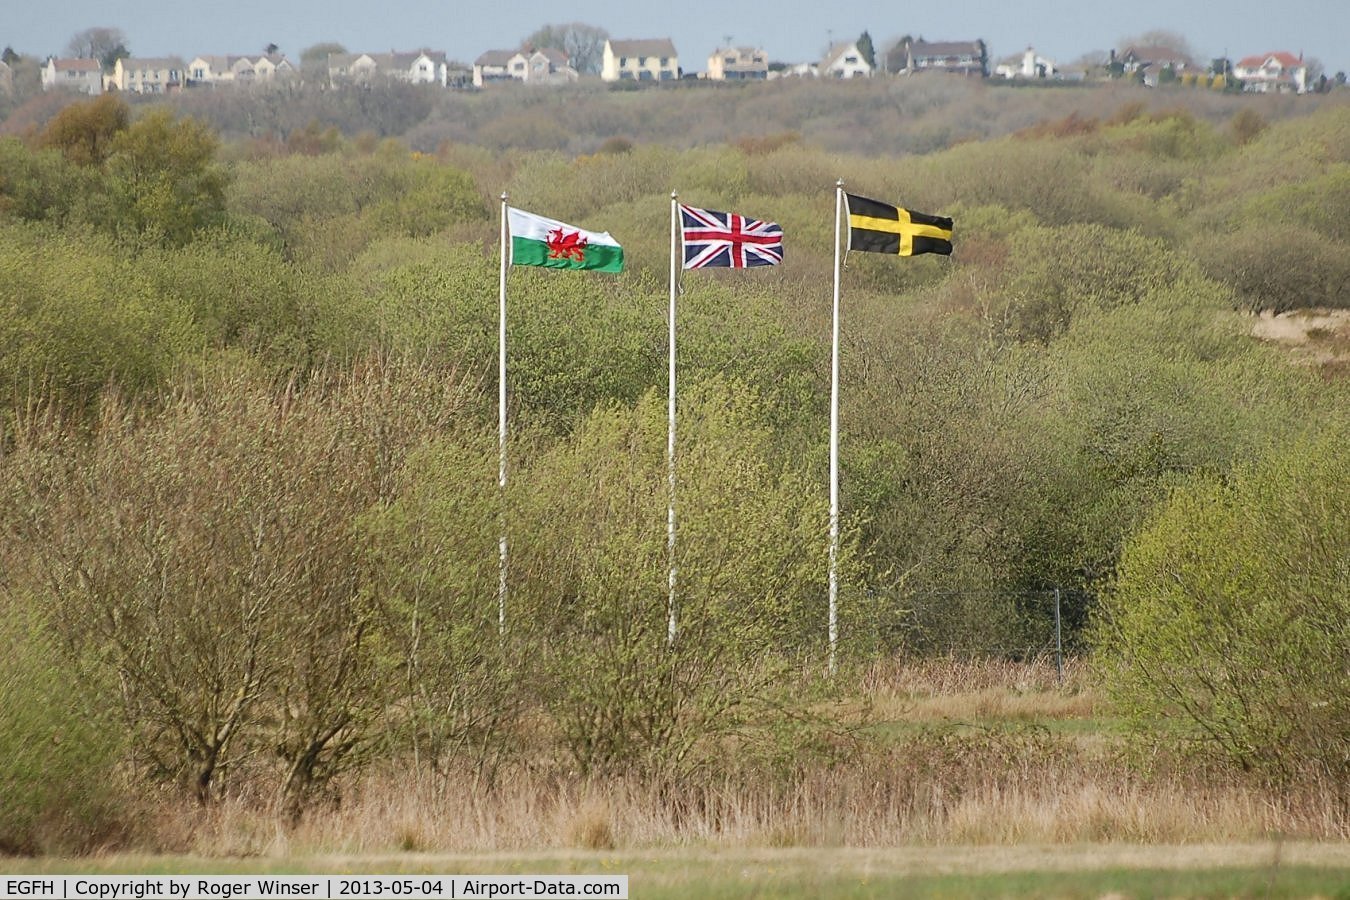 Swansea Airport, Swansea, Wales United Kingdom (EGFH) - Flags at the entrance to Swansea Airport. May 2013.